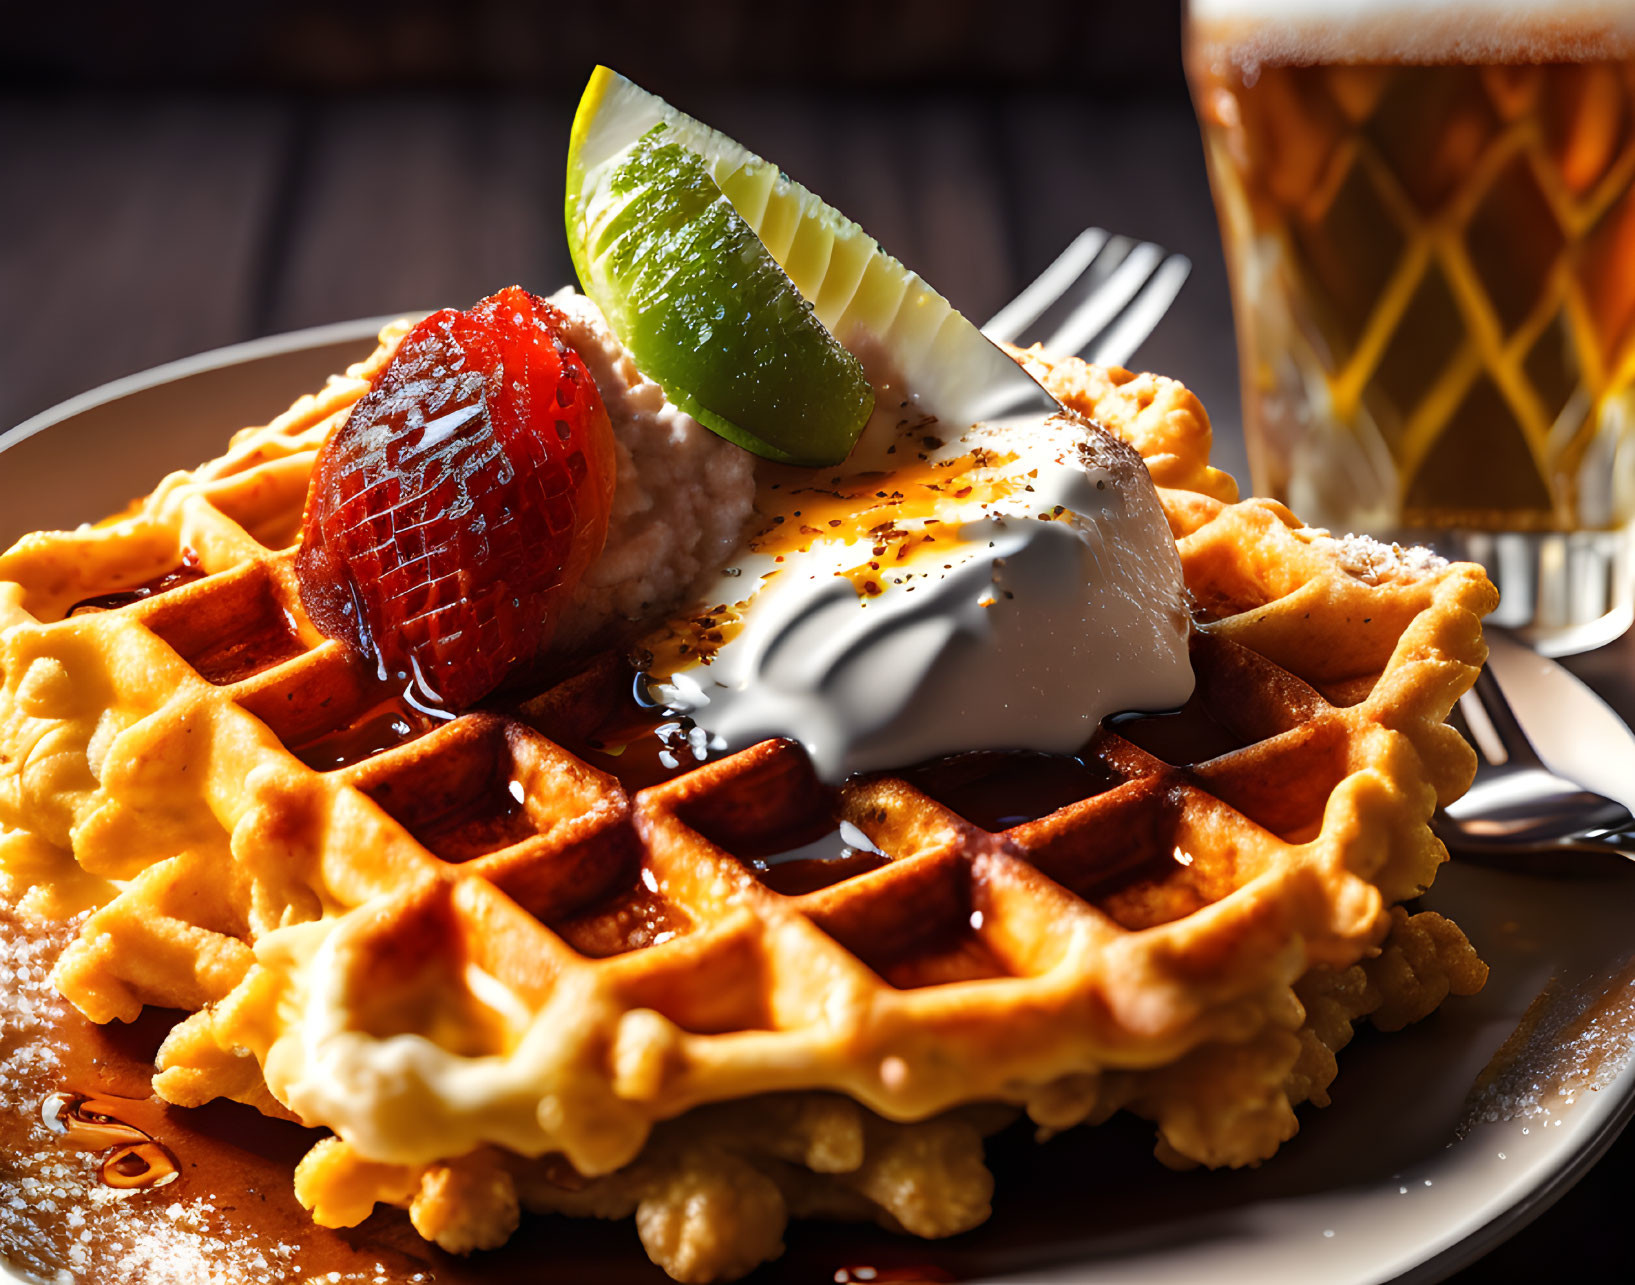 Savory waffle with poached egg, lime, tomato, and syrup on plate with beer